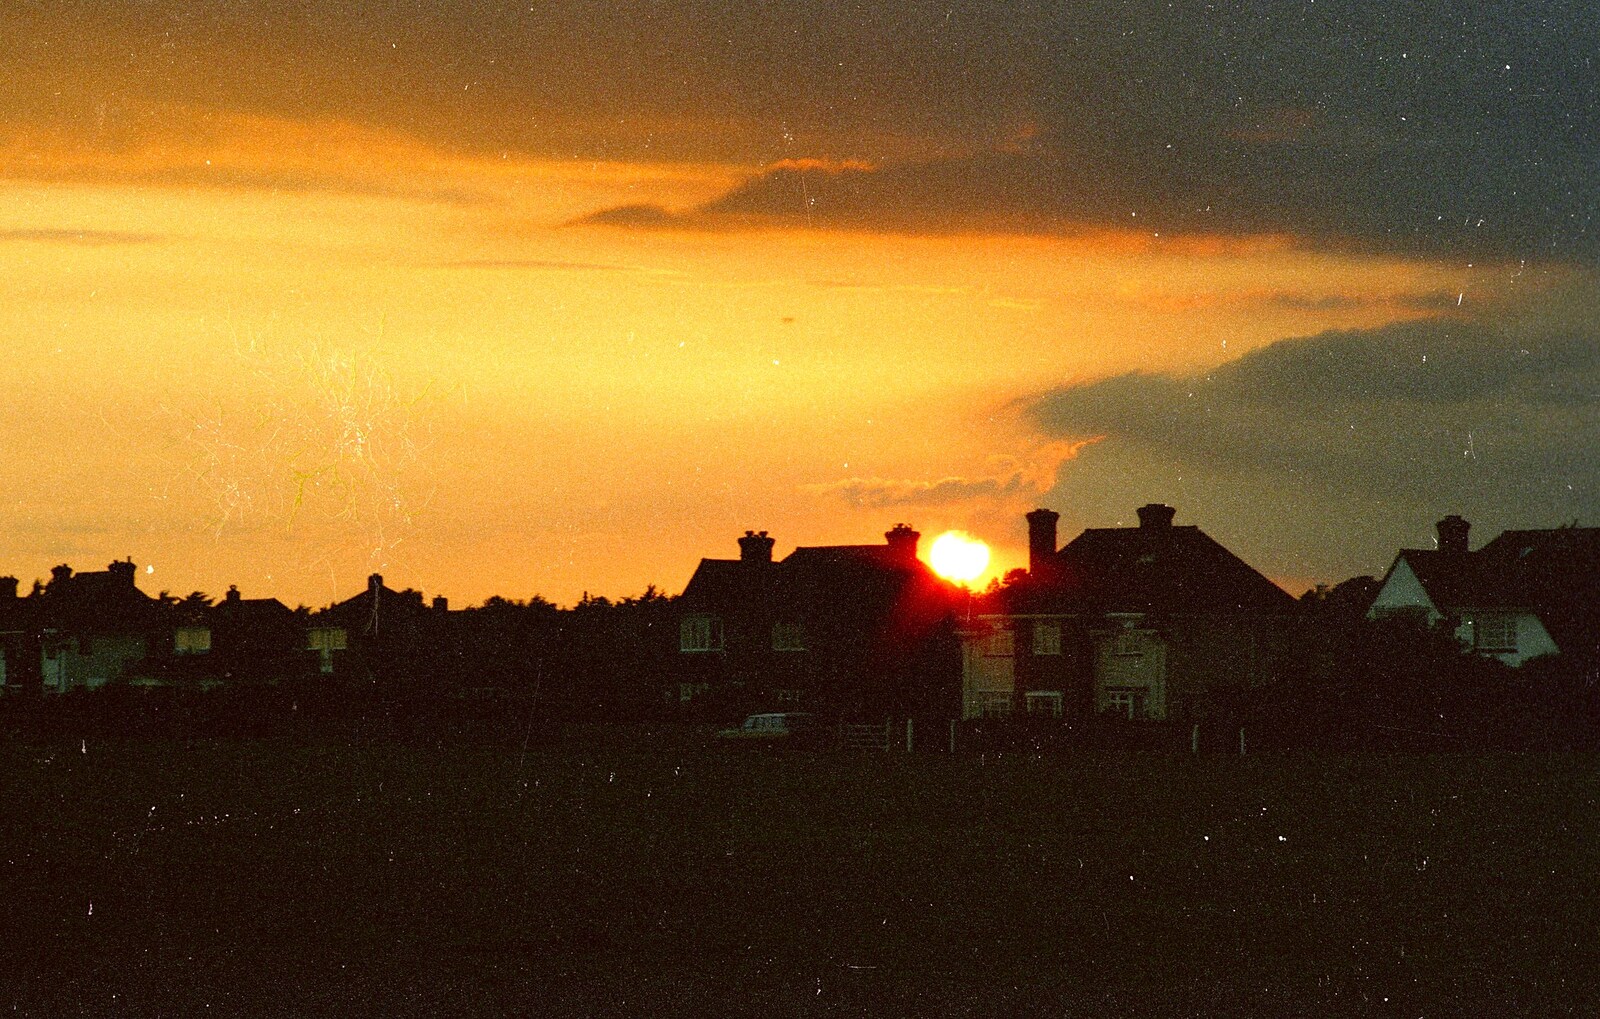 Sunset behind the houses of Barton from A Ford Cottage Miscellany, Barton on Sea, Hampshire - 7th July 1986